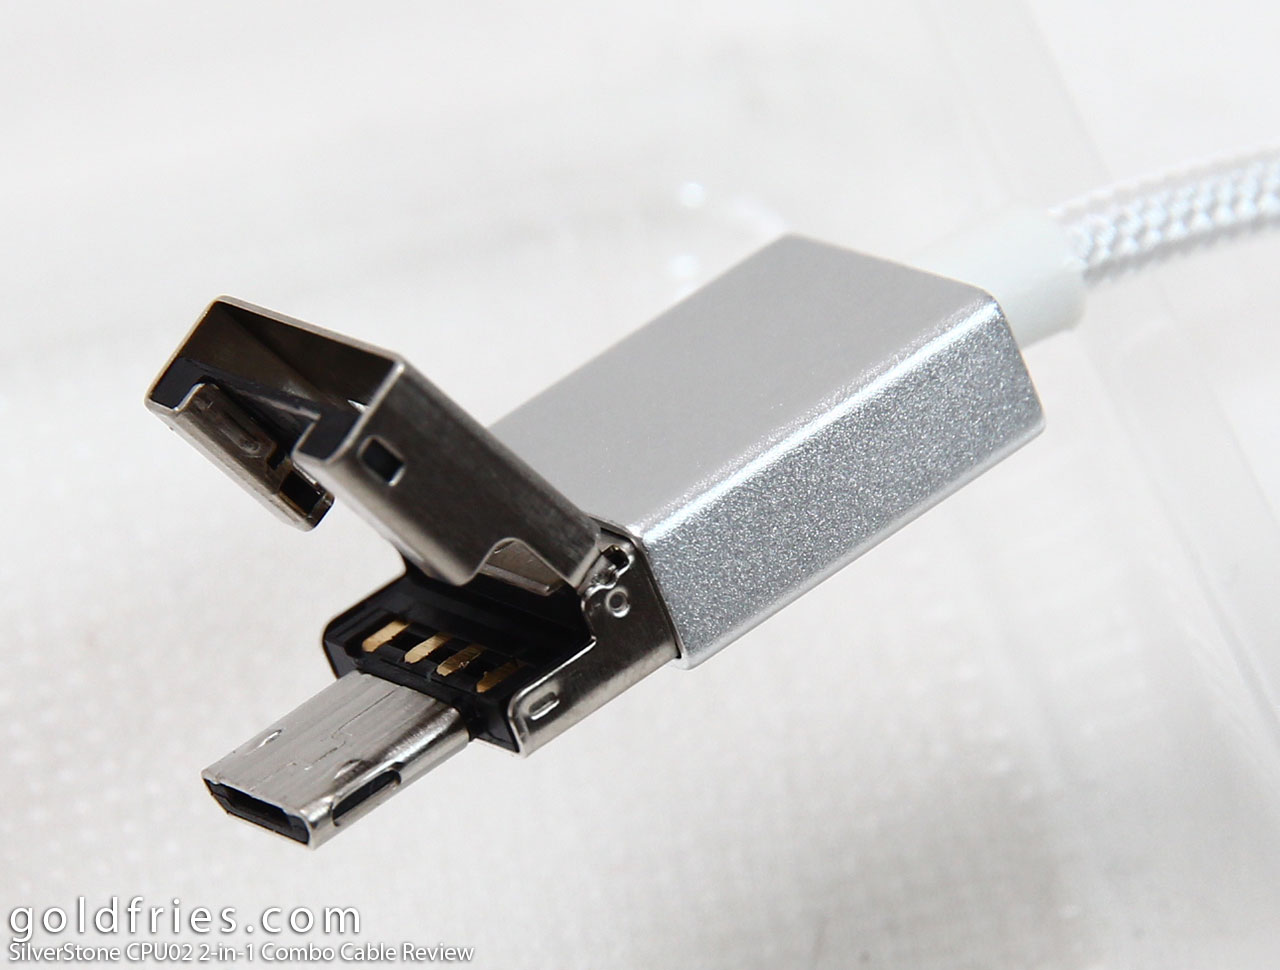 SilverStone CPU02 2-in-1 Combo Cable Review